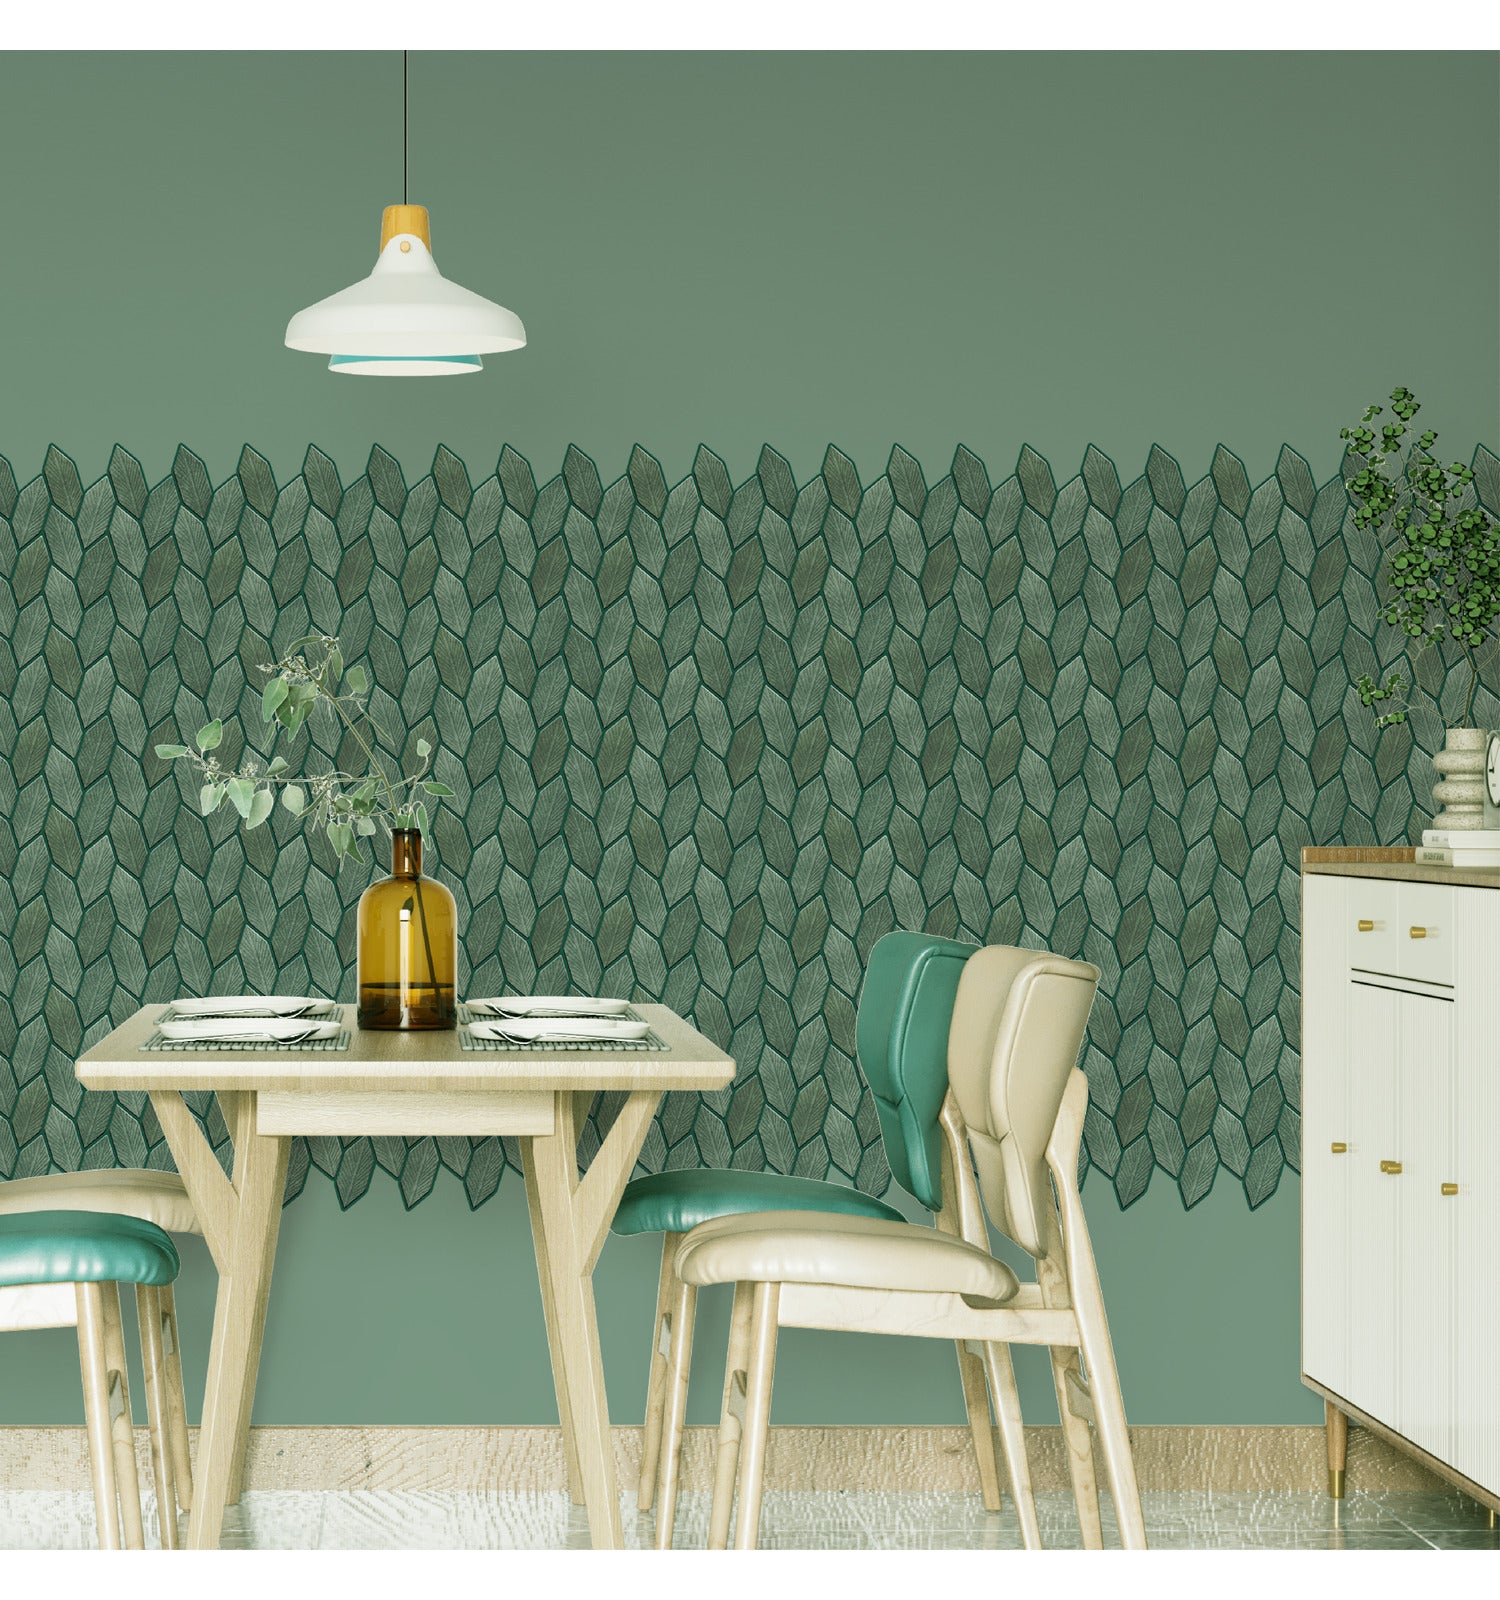 The Sage Green Peel And Stick Wall Tile | Kitchen Backsplash Tiles | Self Adhesive Tiles For Home Décor